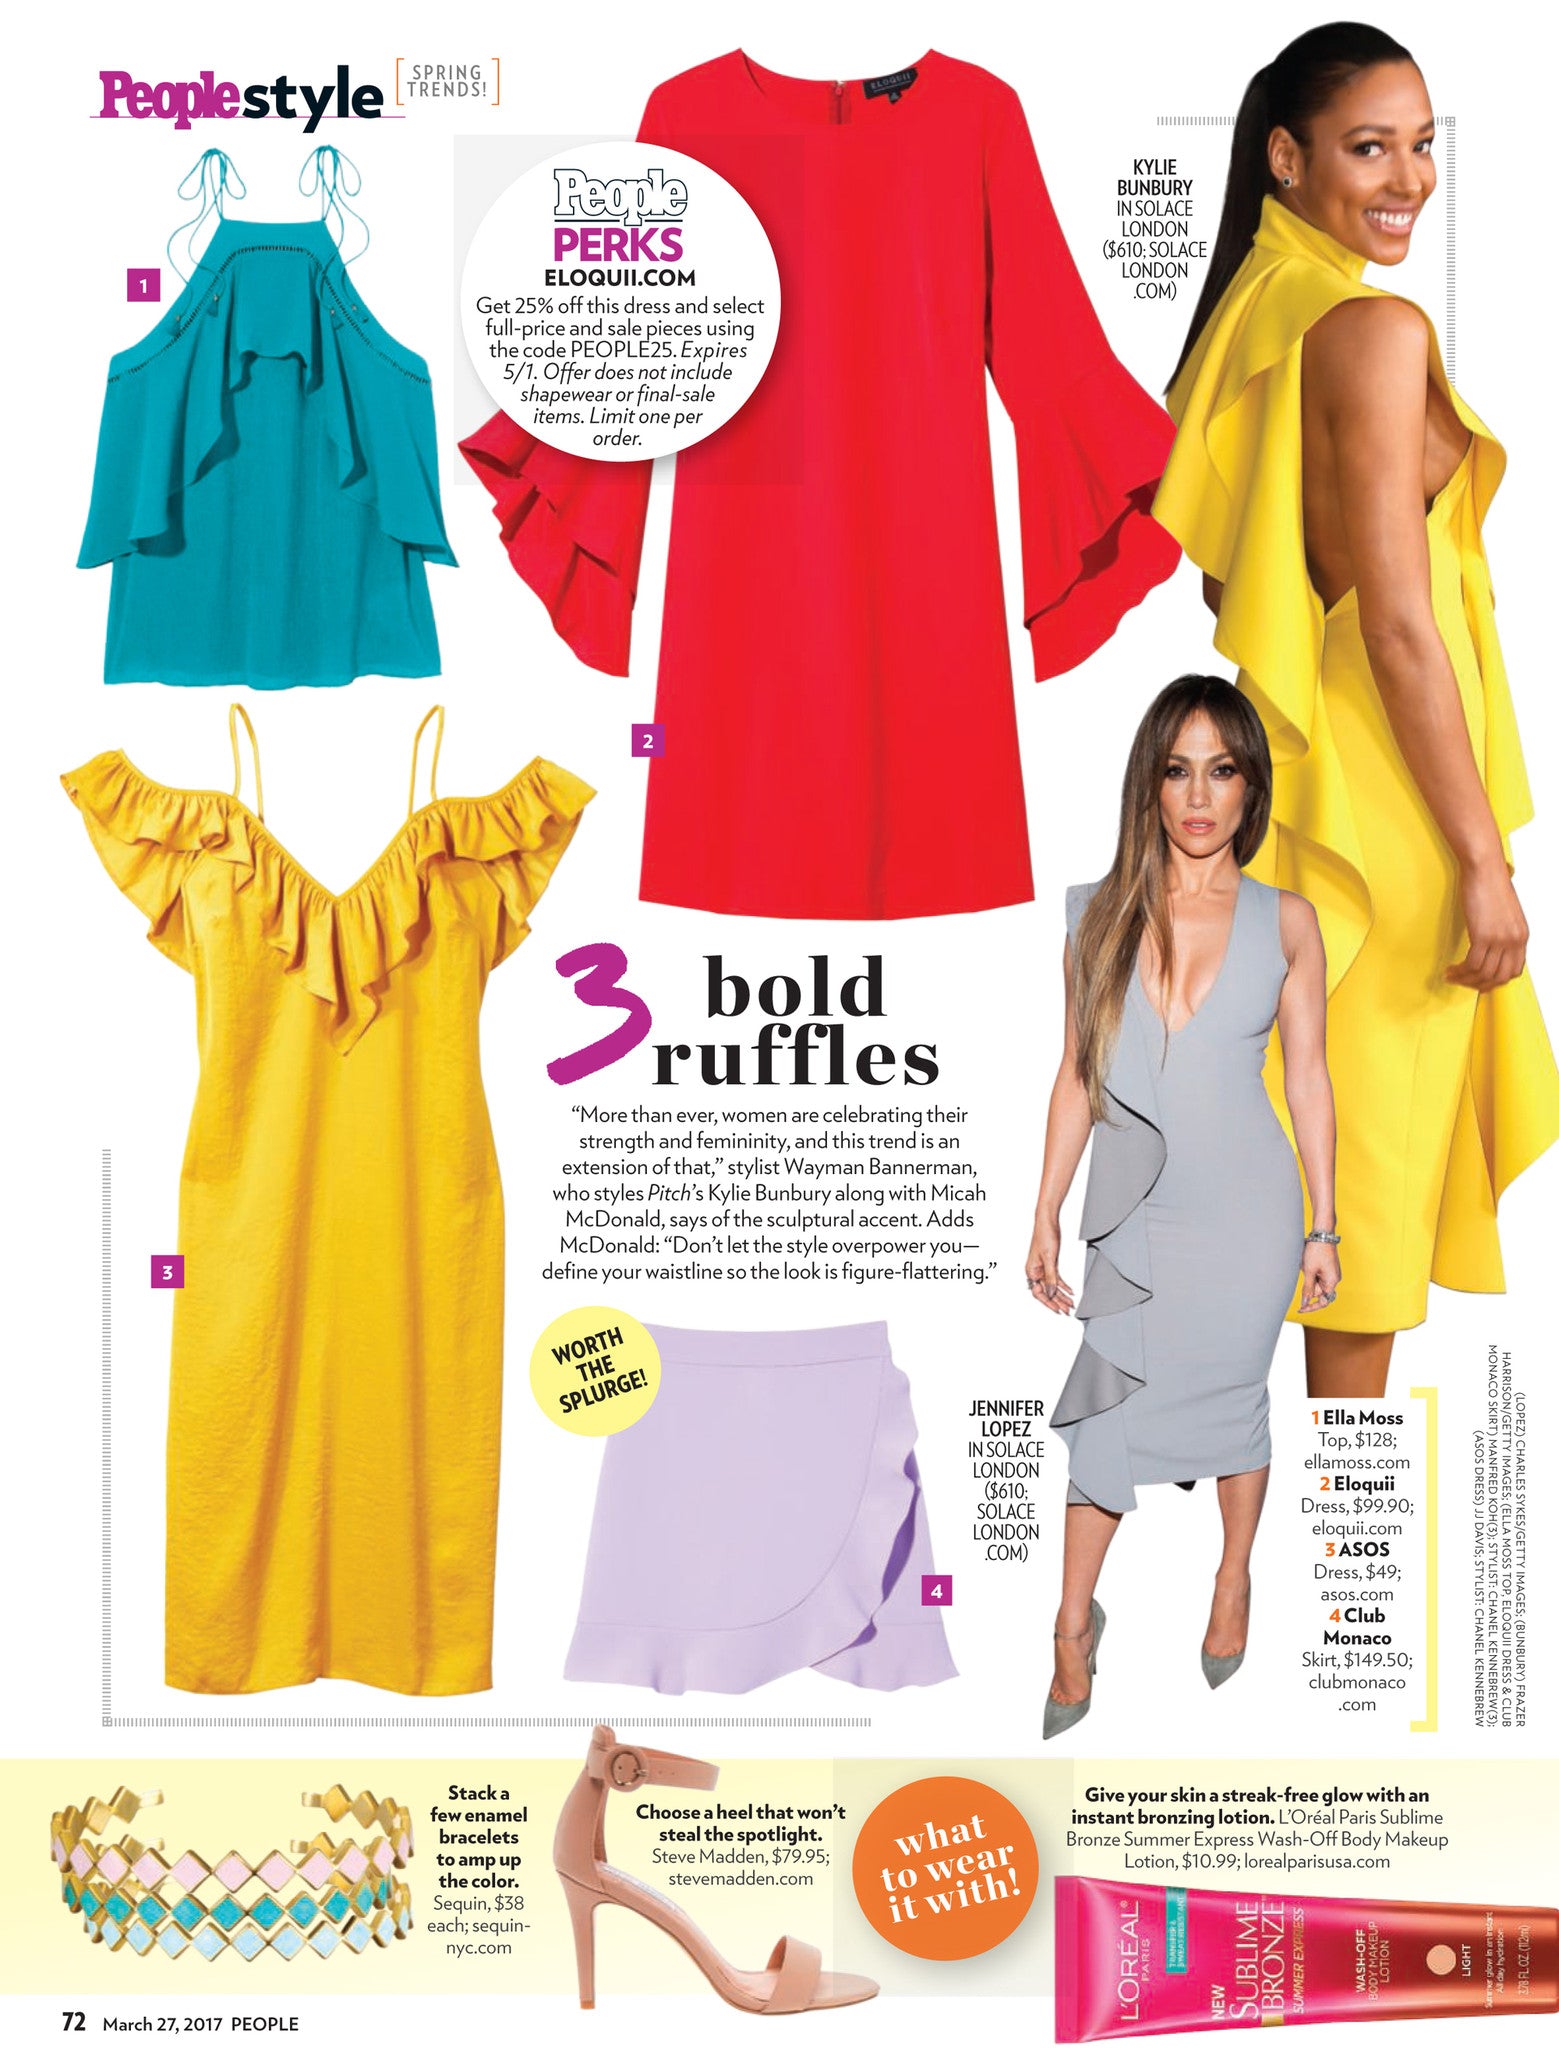 Sequin Enamel Cuffs Featured in People Magazine